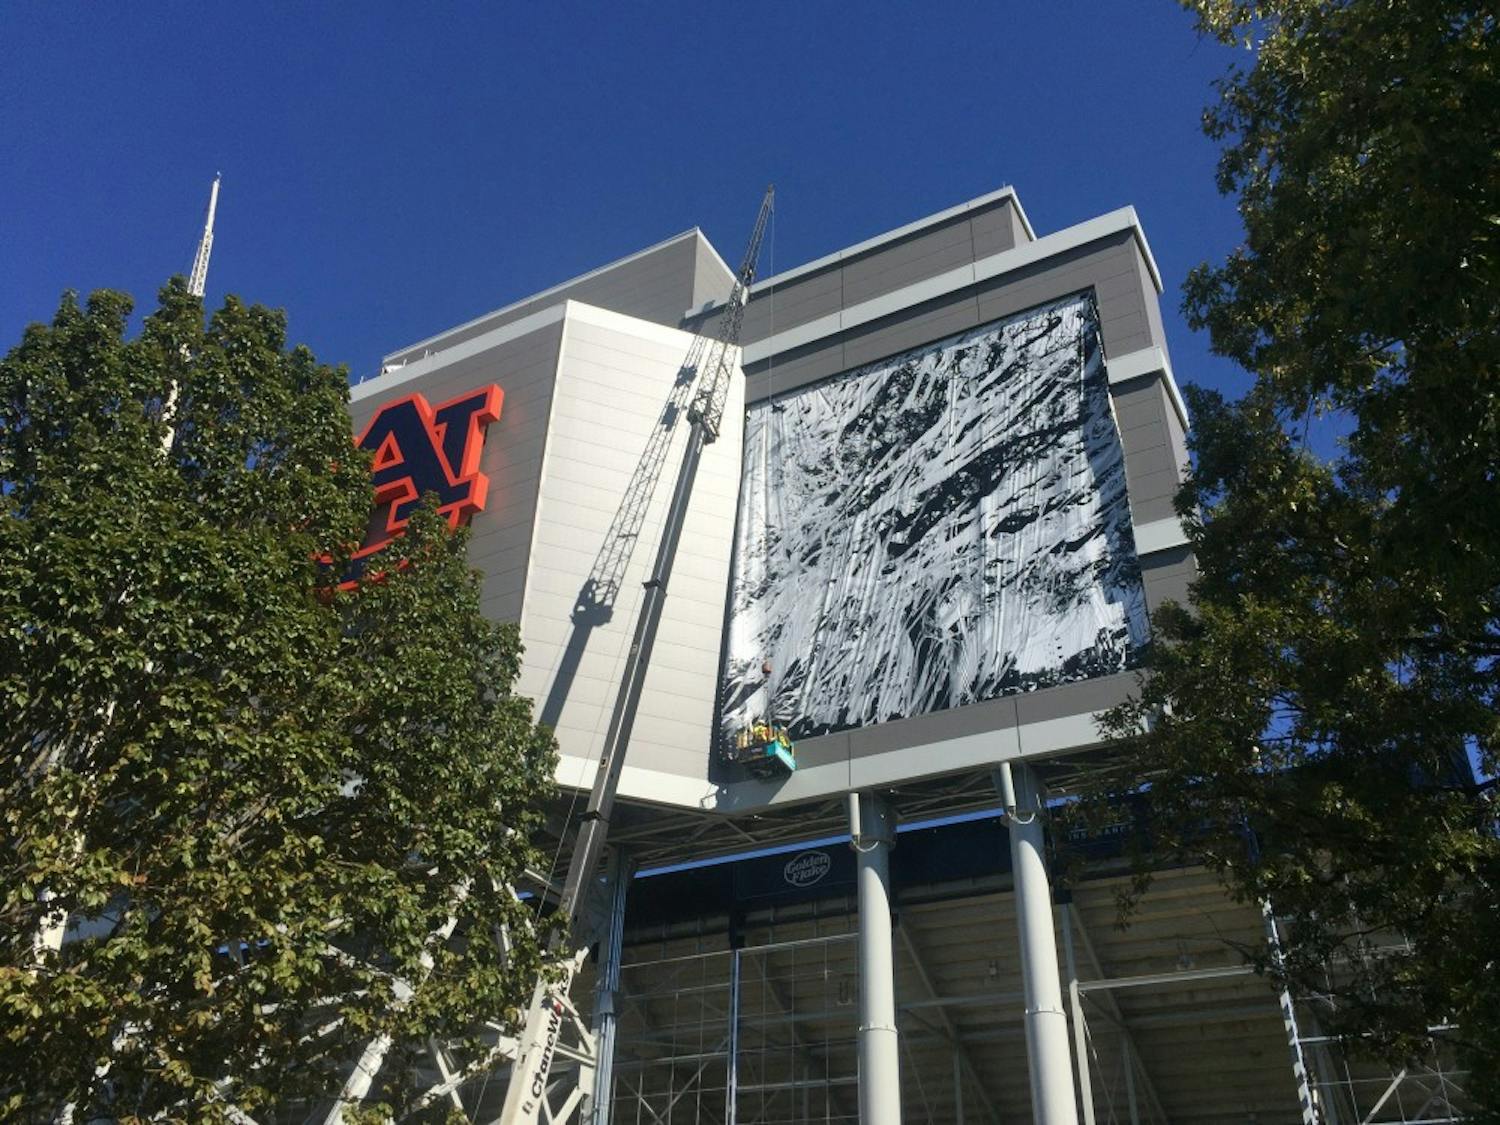 Banners are placed on Auburn's scoreboard at Jordan-Hare Stadium on Wednesday, Oct. 14. (Evan McCullers | Assistant Sports Editor)